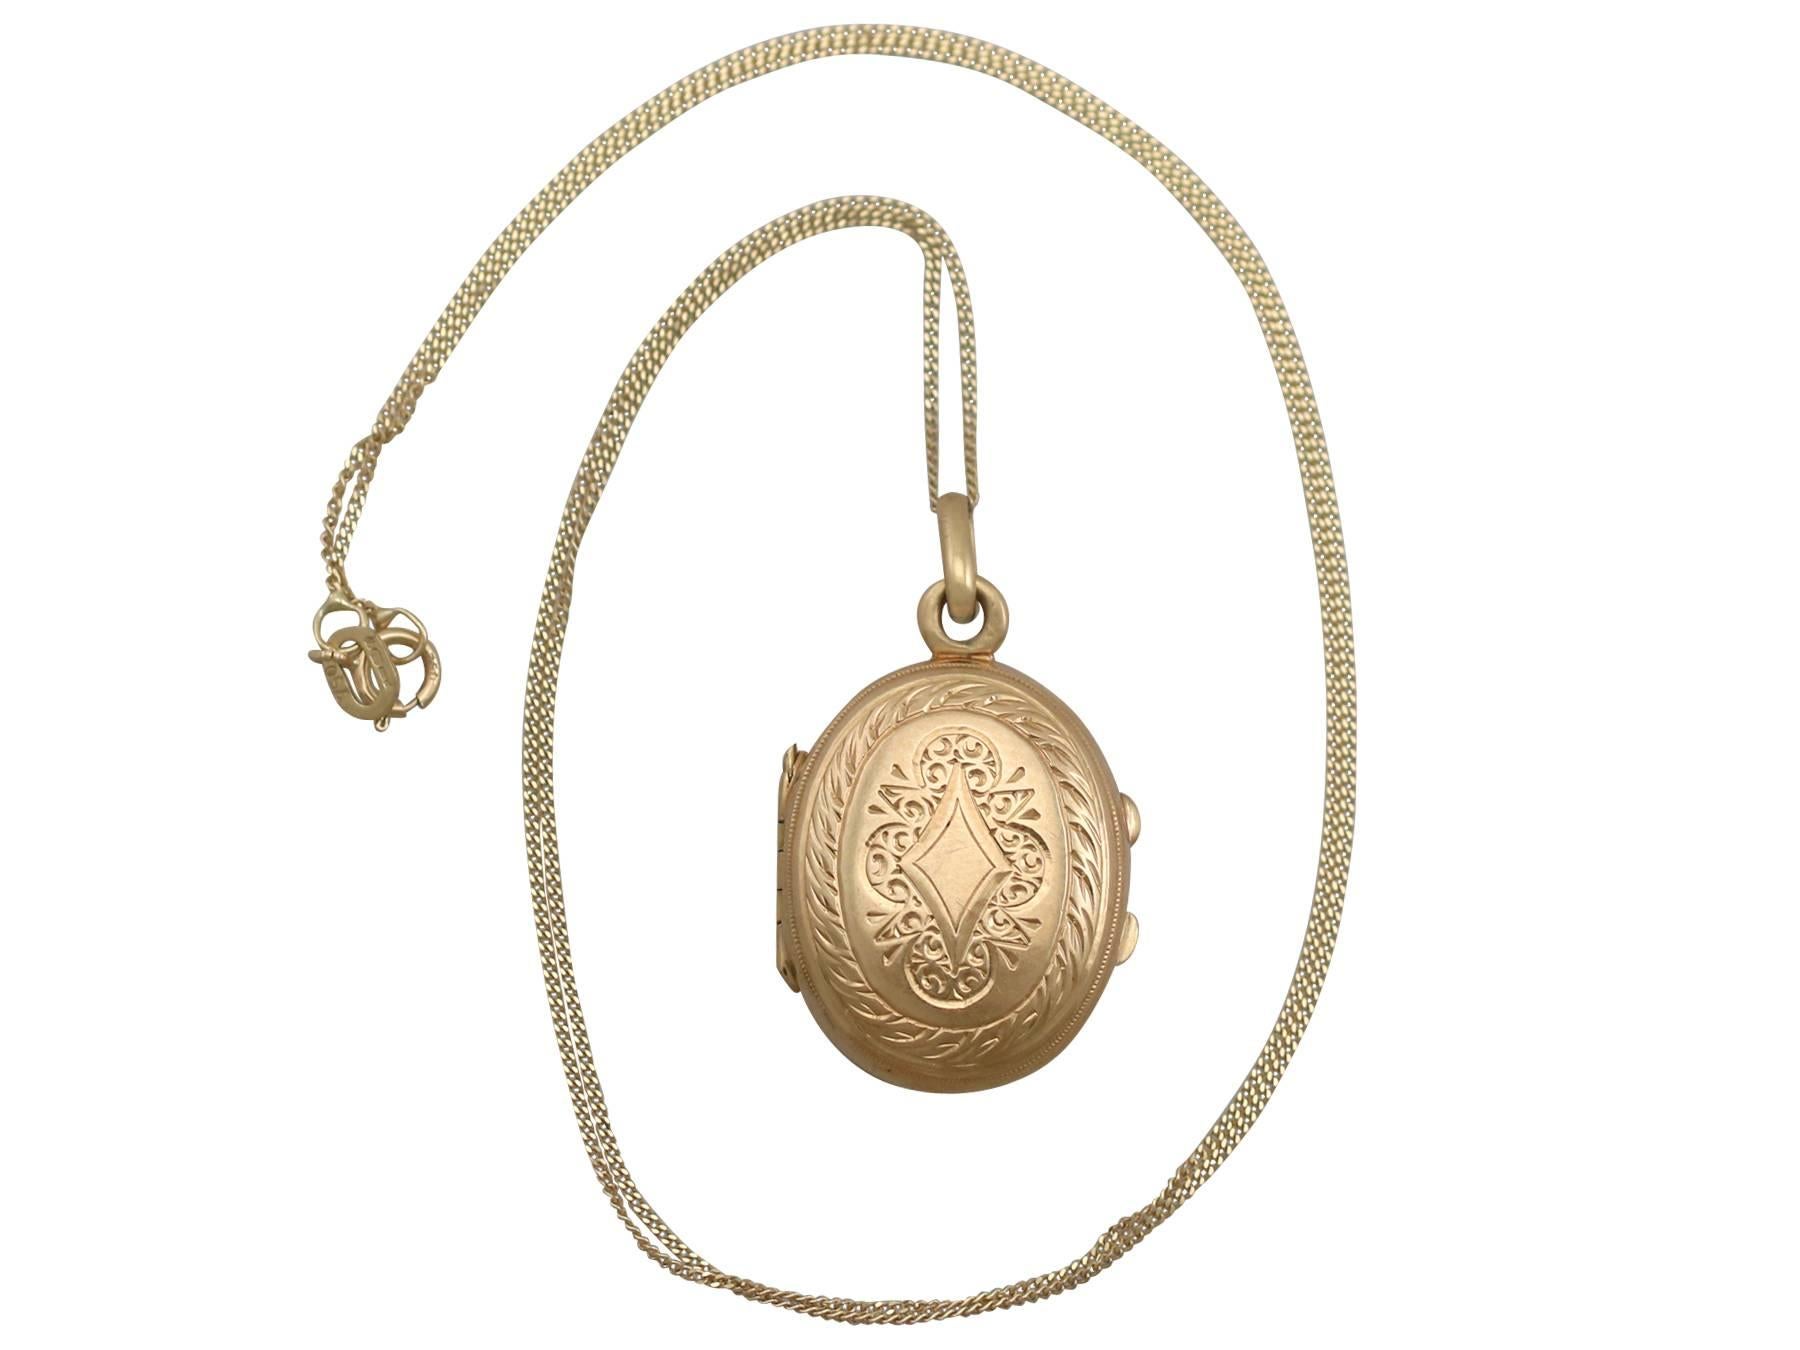 An impressive antique French 1890's 18 karat yellow gold locket pendant; part of our diverse antique jewelry and estate jewelry collections

This stunning, fine and impressive antique French locket has been crafted in 18k yellow gold.

The locket